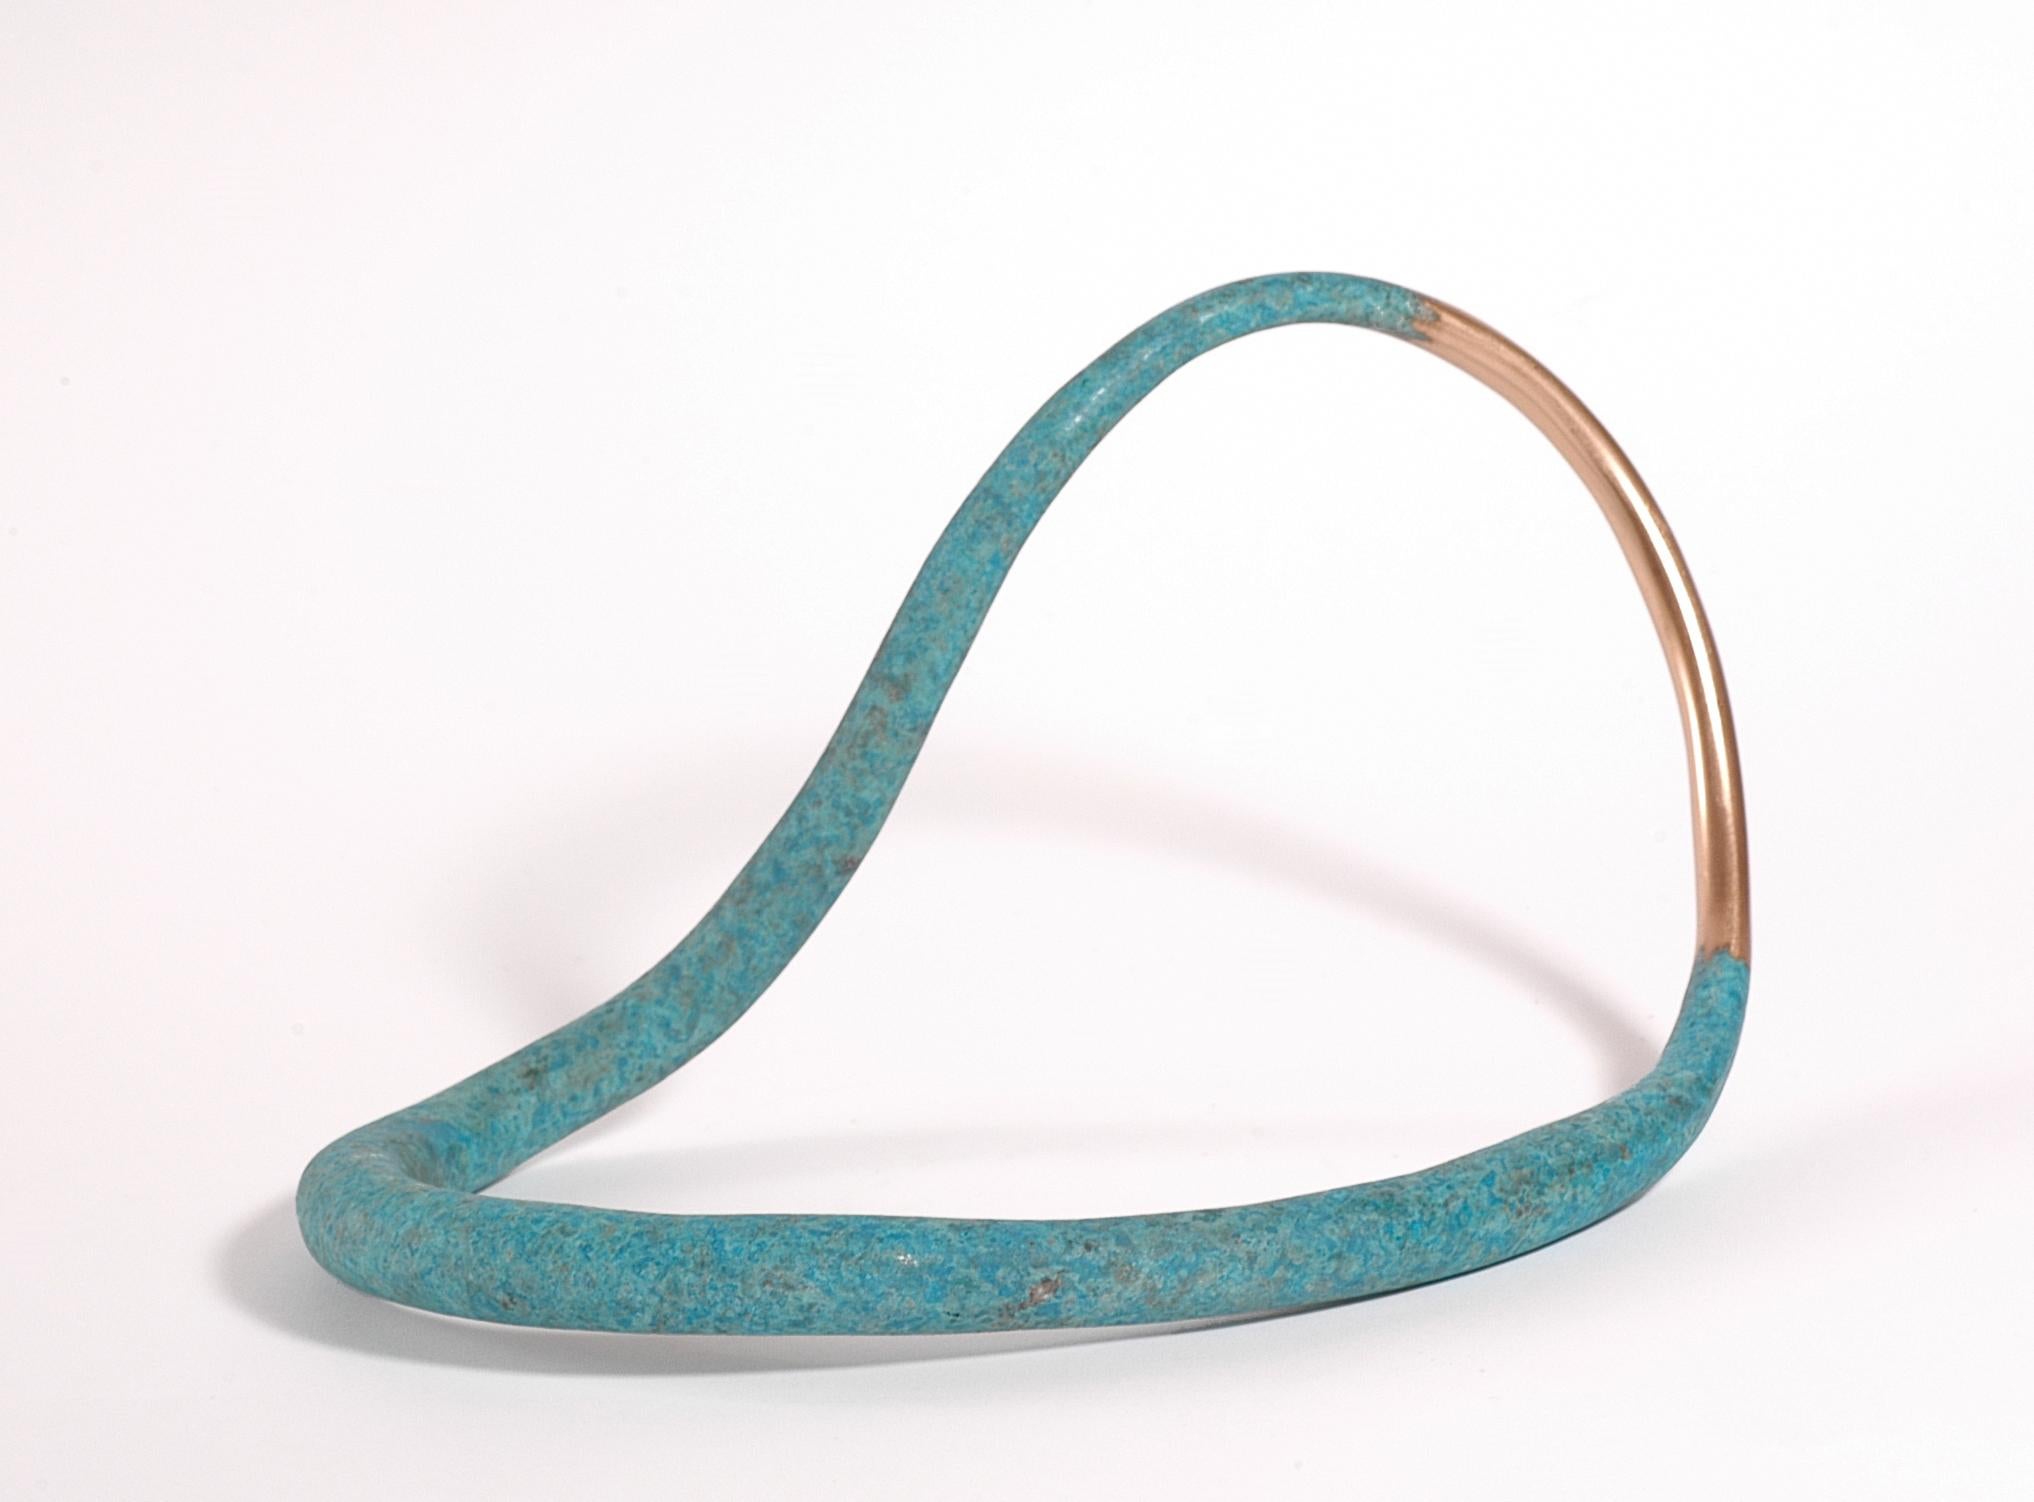 Bronze
Series of individual variations
Stamped with monogram signature on underside and uniquely numbered 615A
This sculpture sits low on a surface and is ideal for placement on a low table where it can be viewed from above and the many different